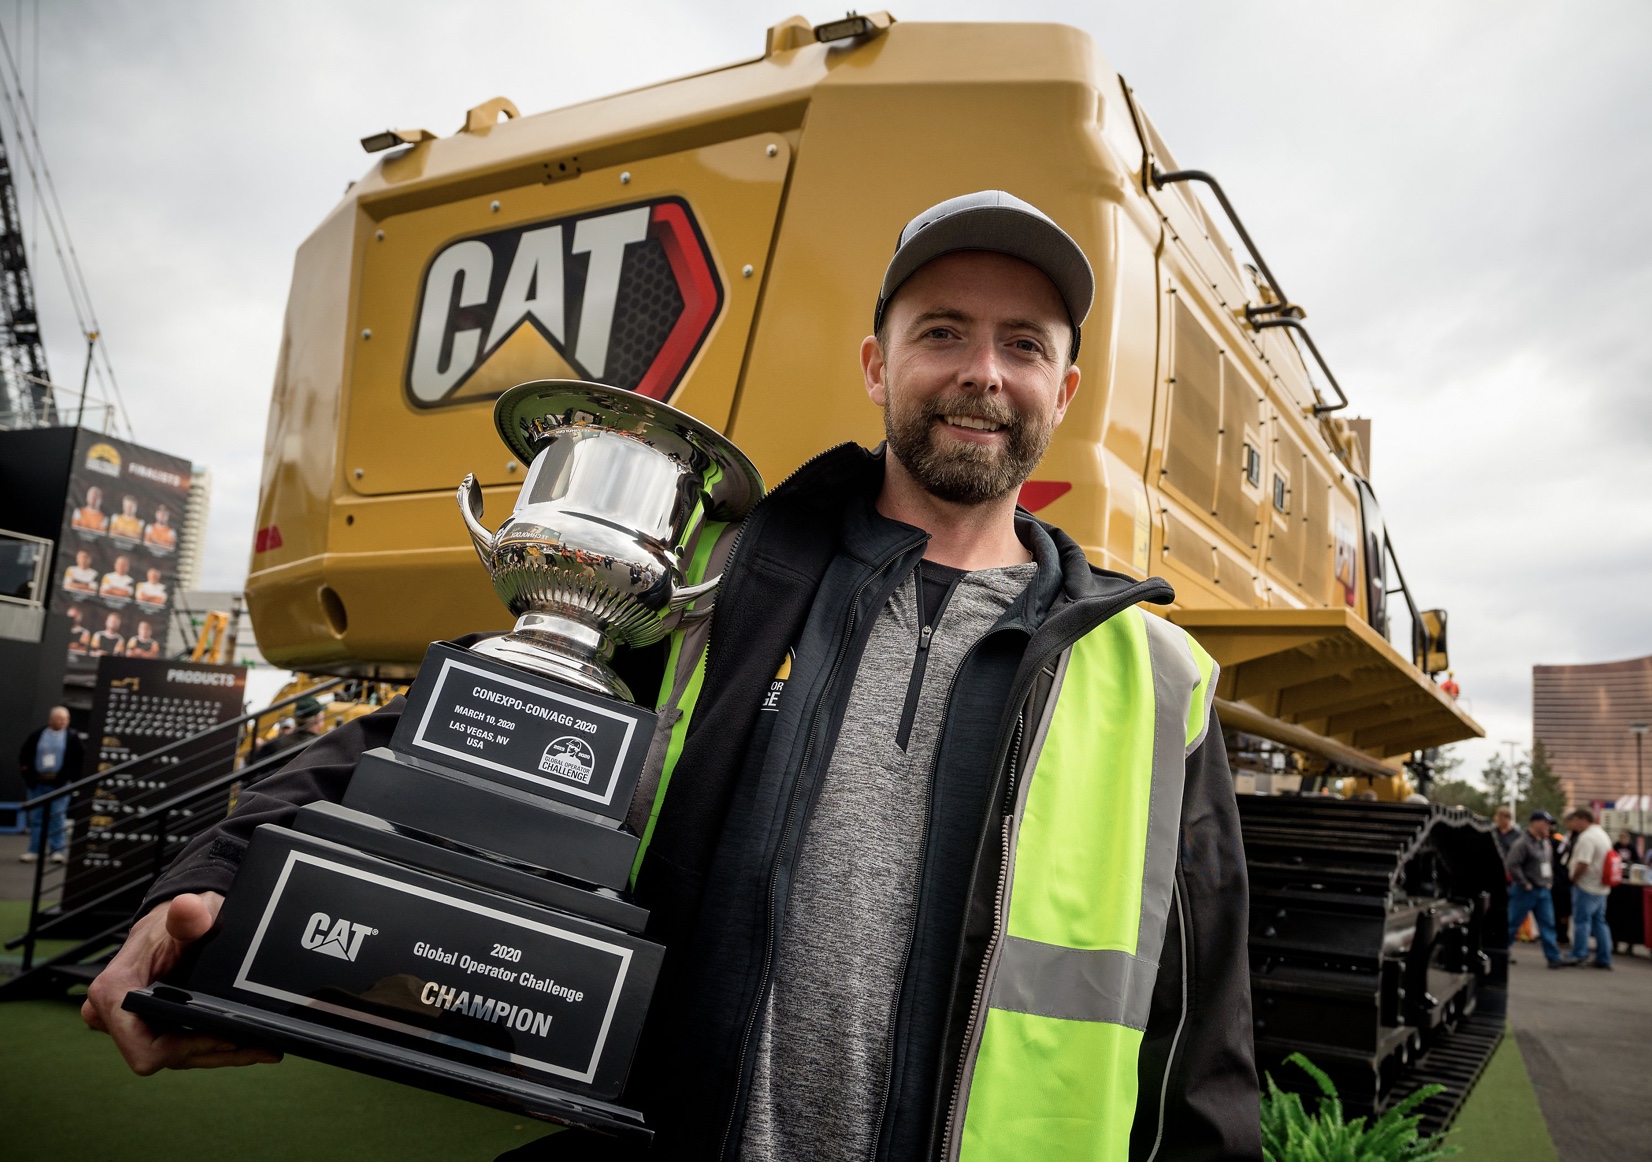 Caterpillar Launches Bigger, More Competitive 2022/23 Global Operator